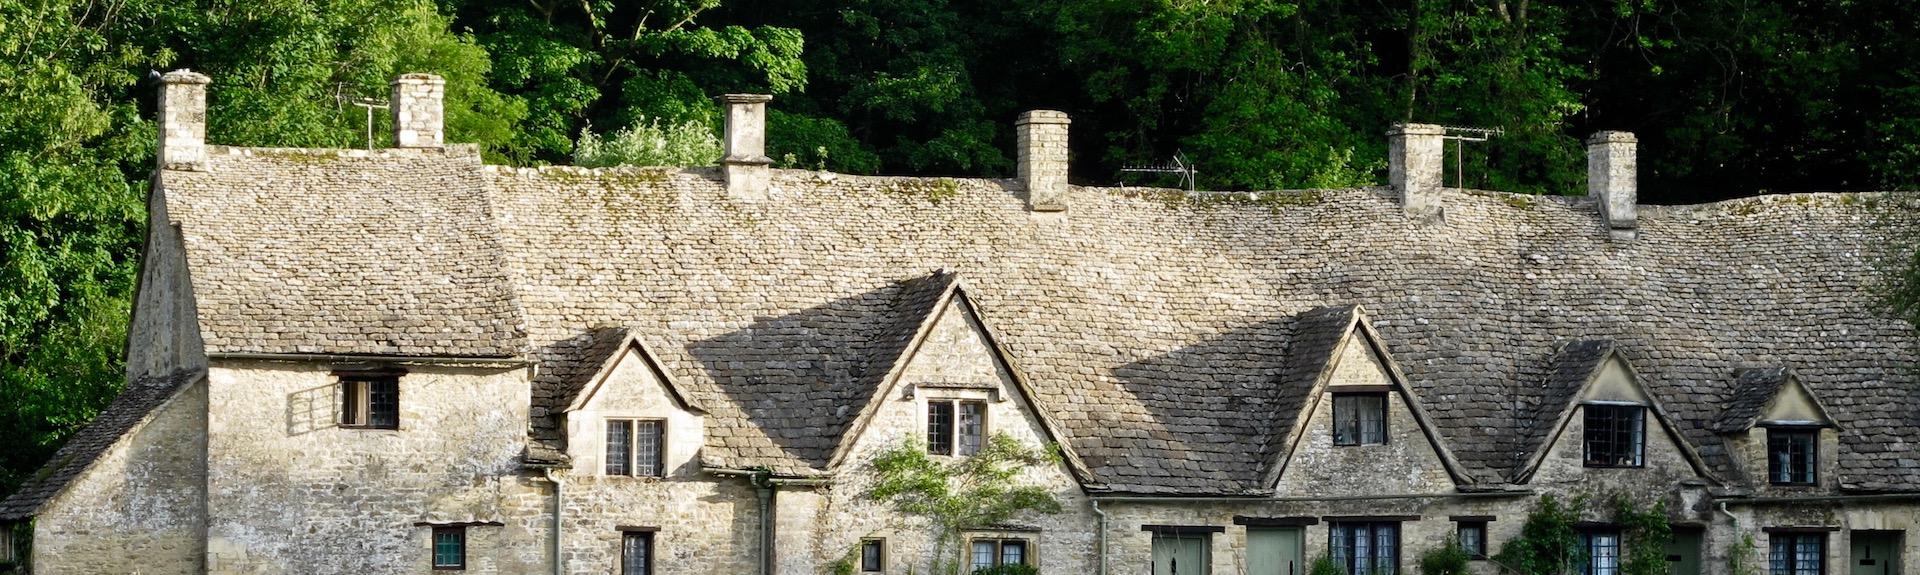 Arlington Row Cottages in the Cotswolds